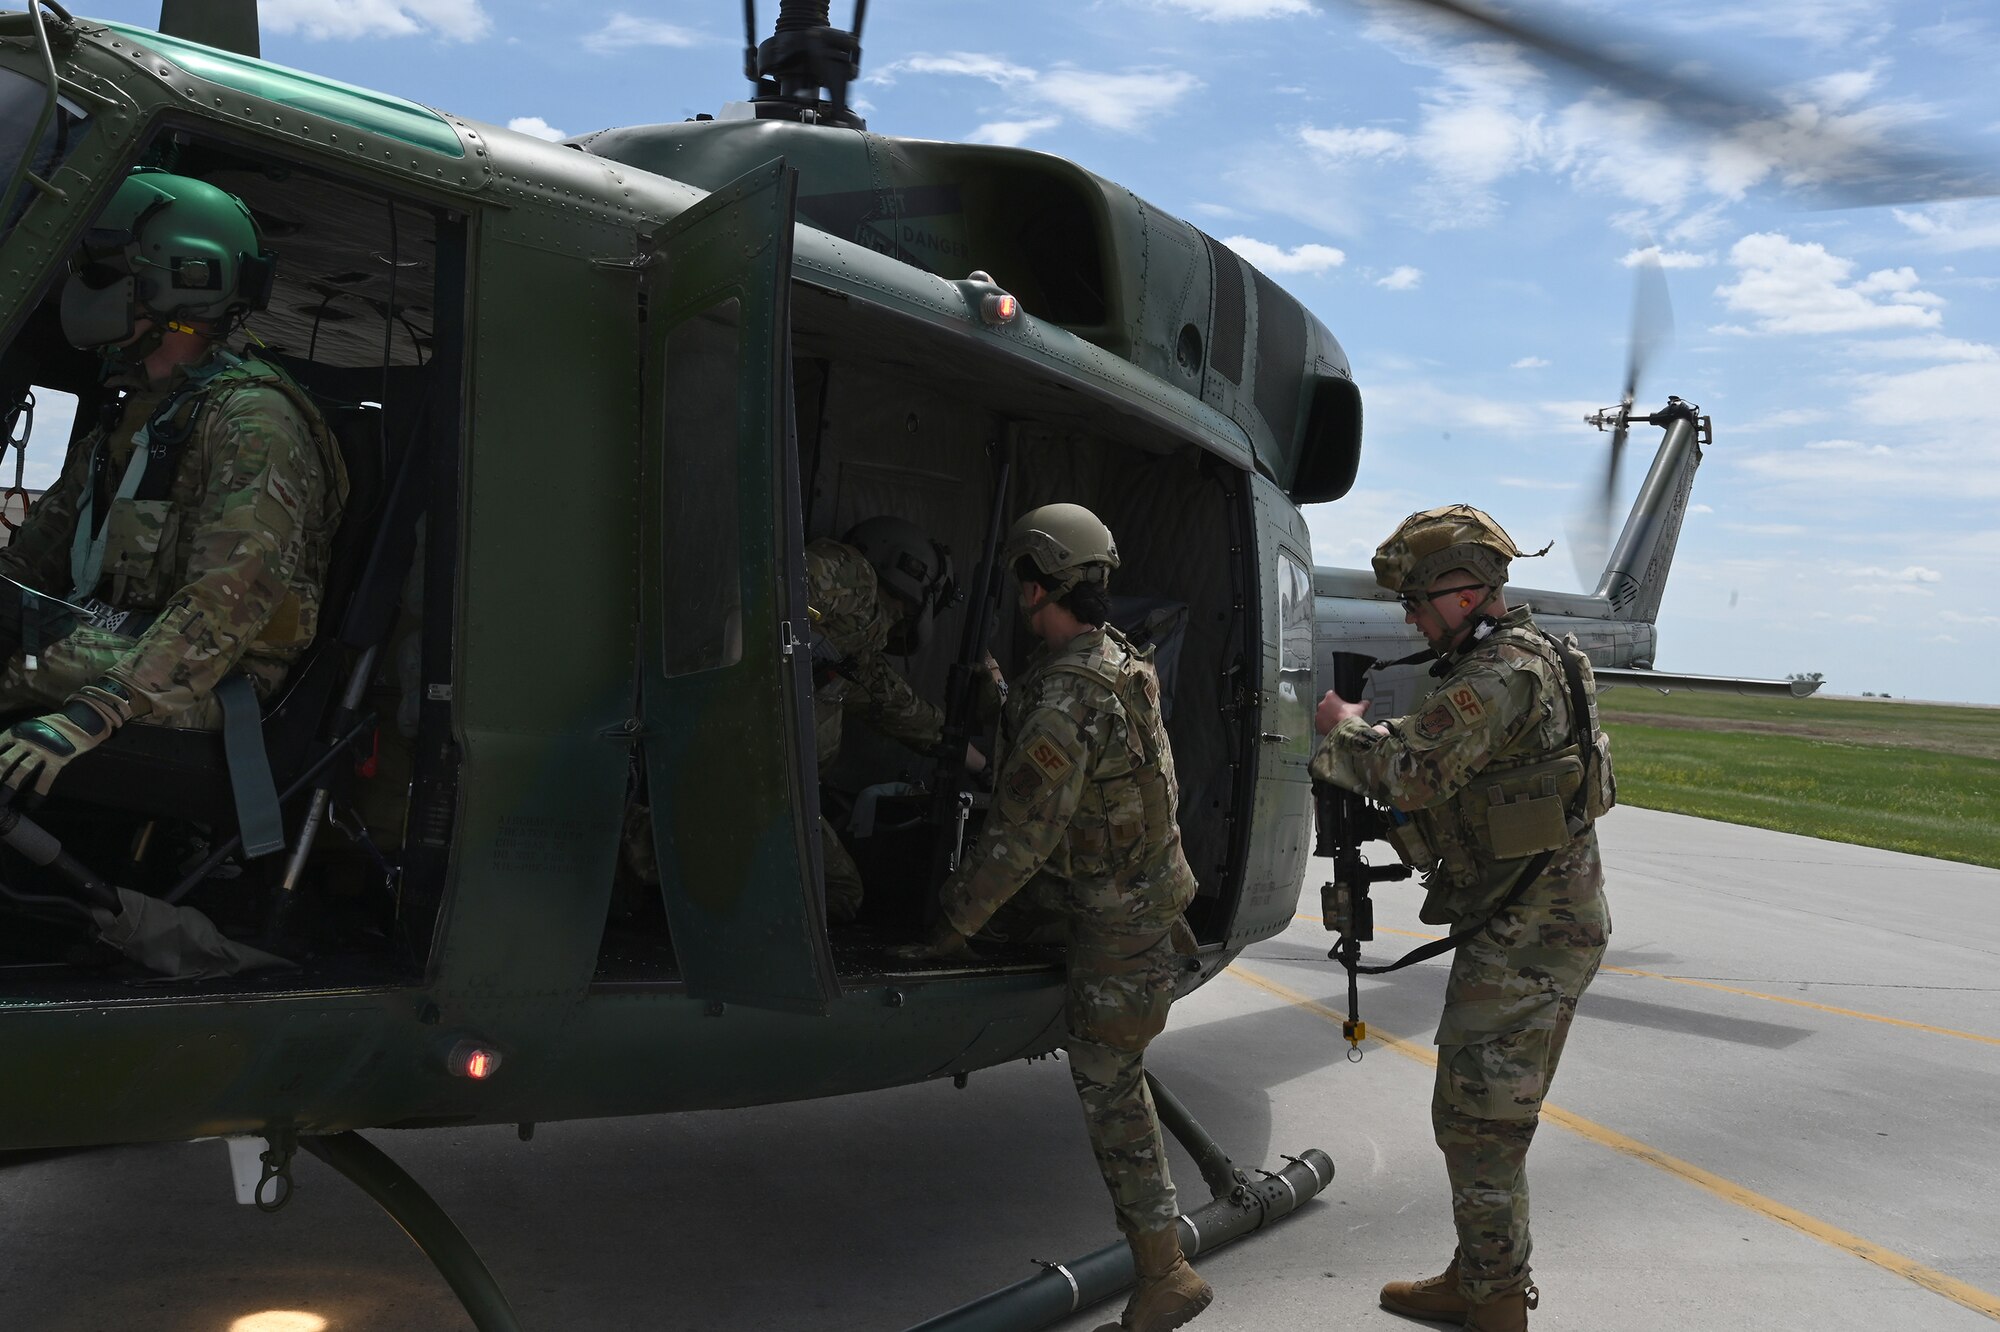 Two North Dakota Air National Guard 219th Security Forces Squadron members in uniform climb into the open door of a UH-1N Huey helicopter as it prepares for launch at the Minot Air Force Base, N.D., June 24, 2021.